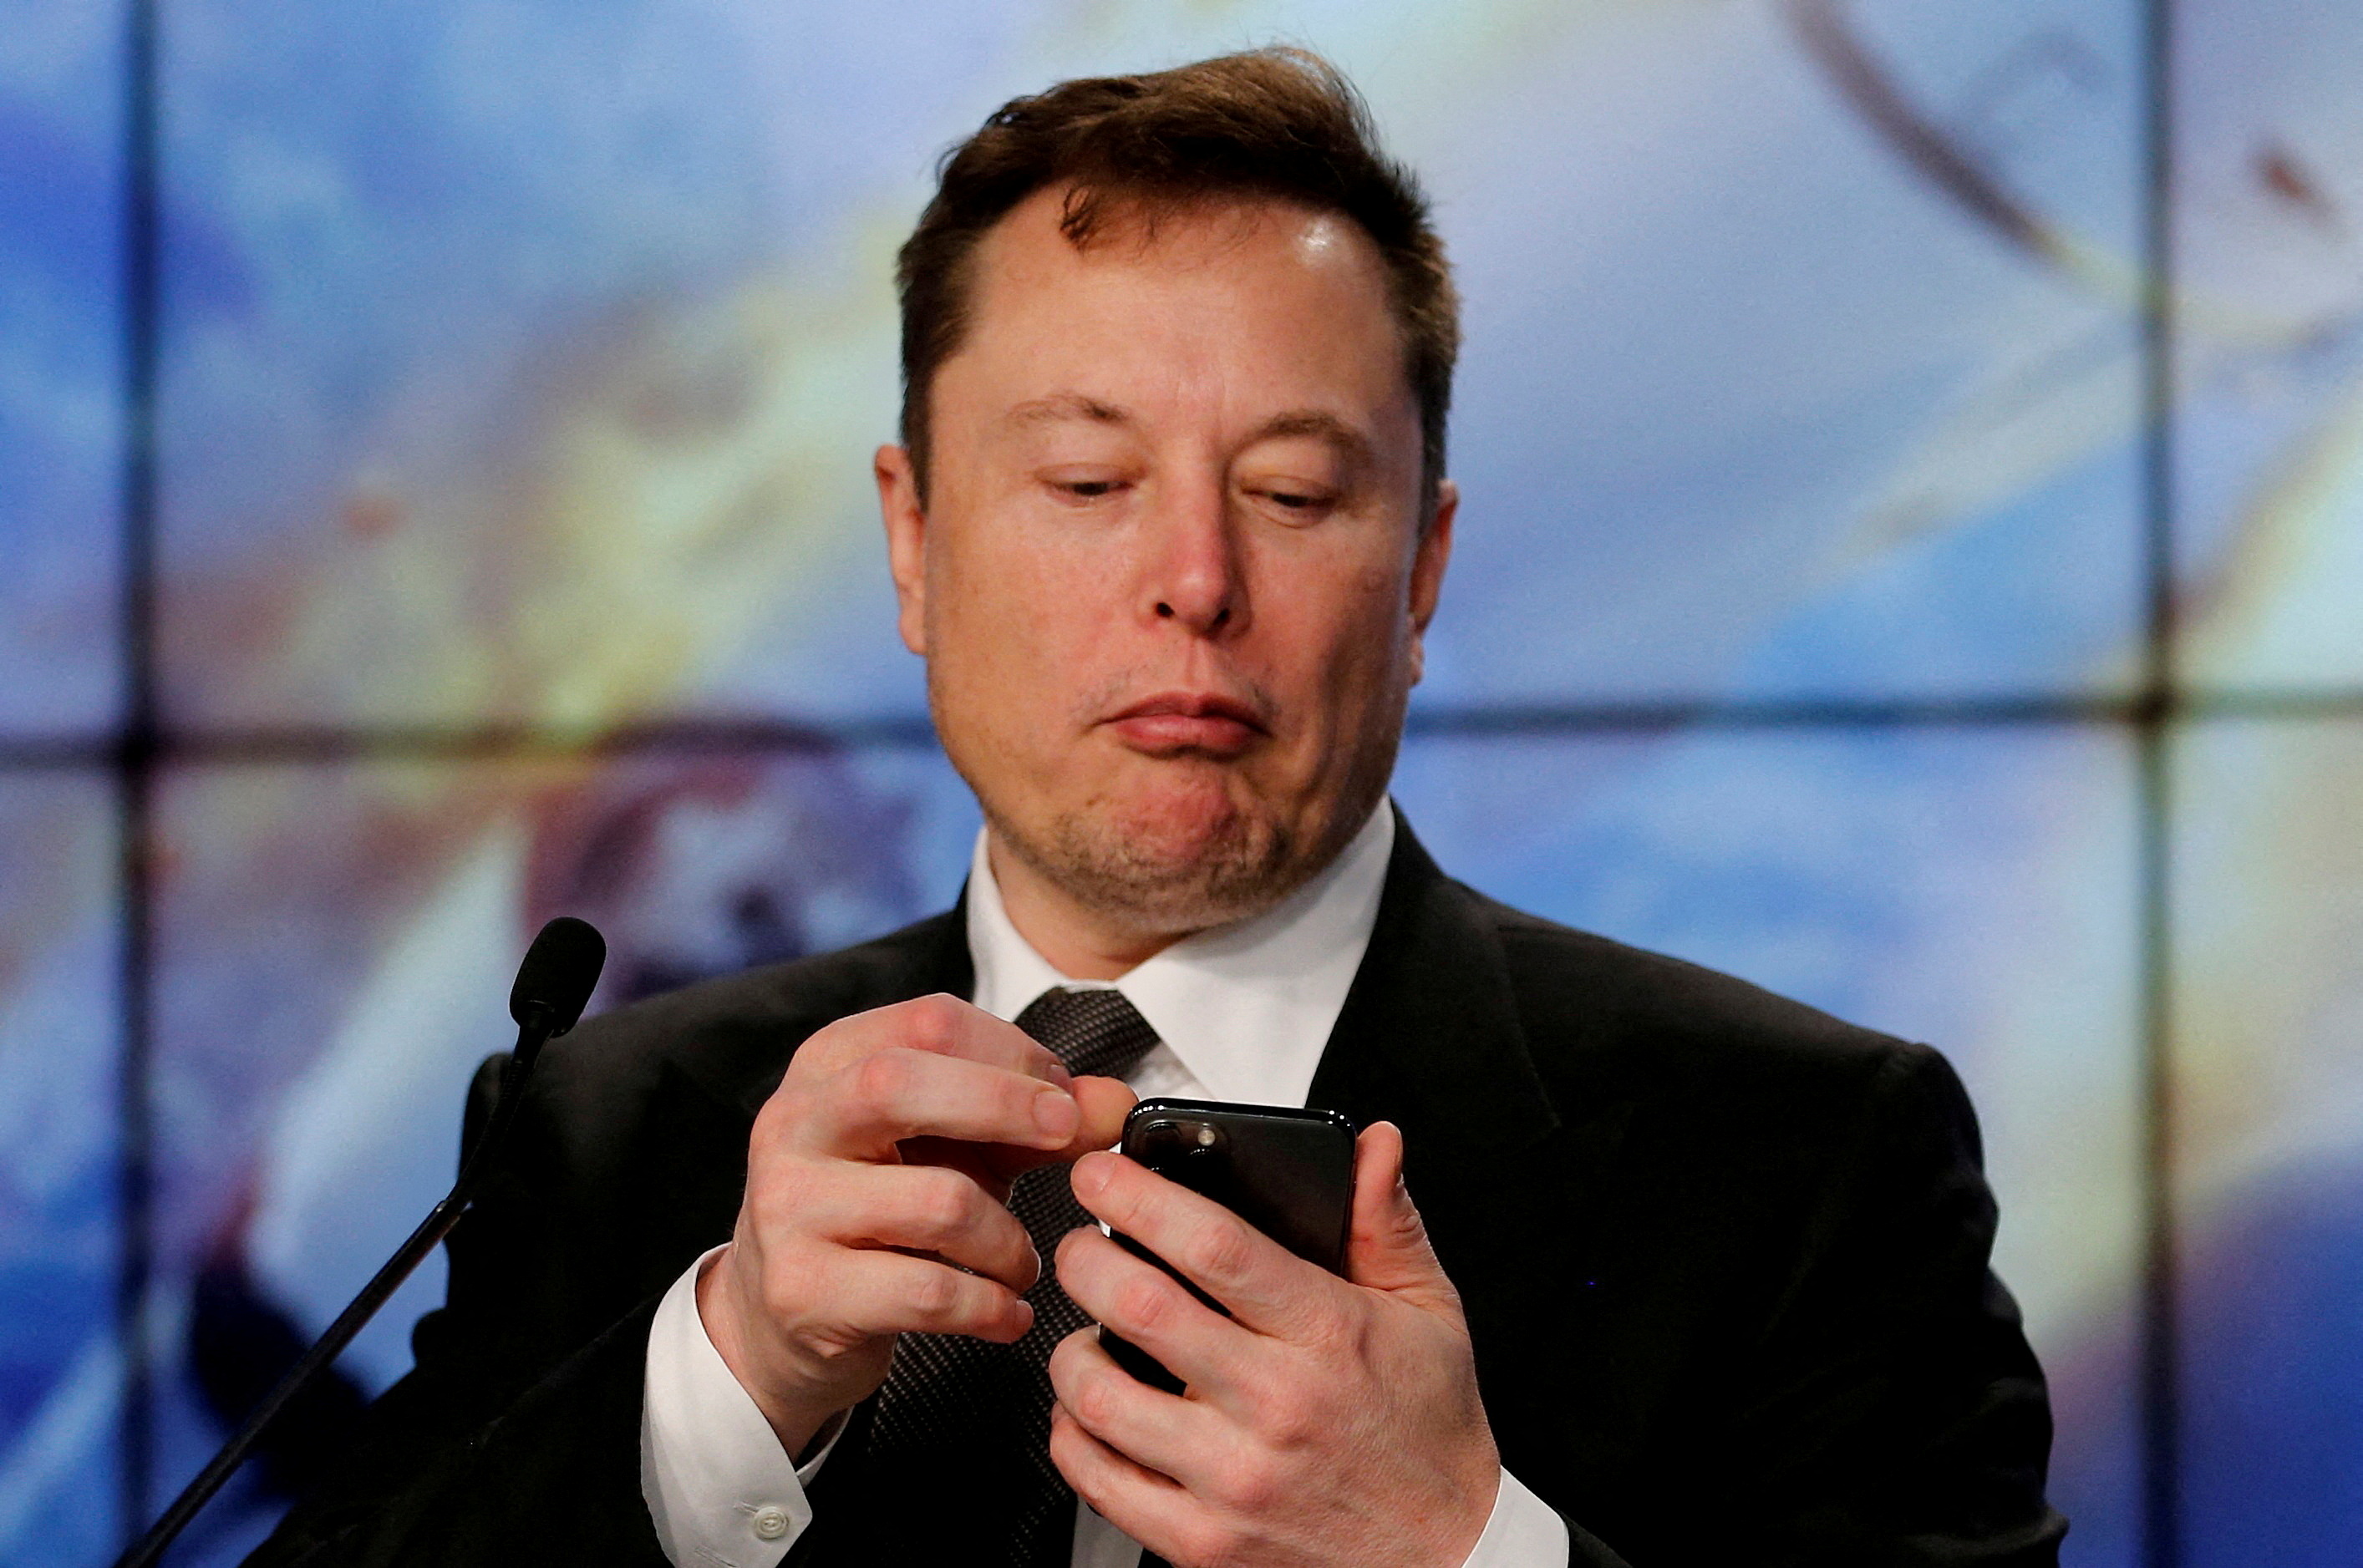 Elon Musk looks at his mobile phone during a post-launch news conference to discuss the  SpaceX Crew Dragon astronaut capsule in-flight abort test at the Kennedy Space Center